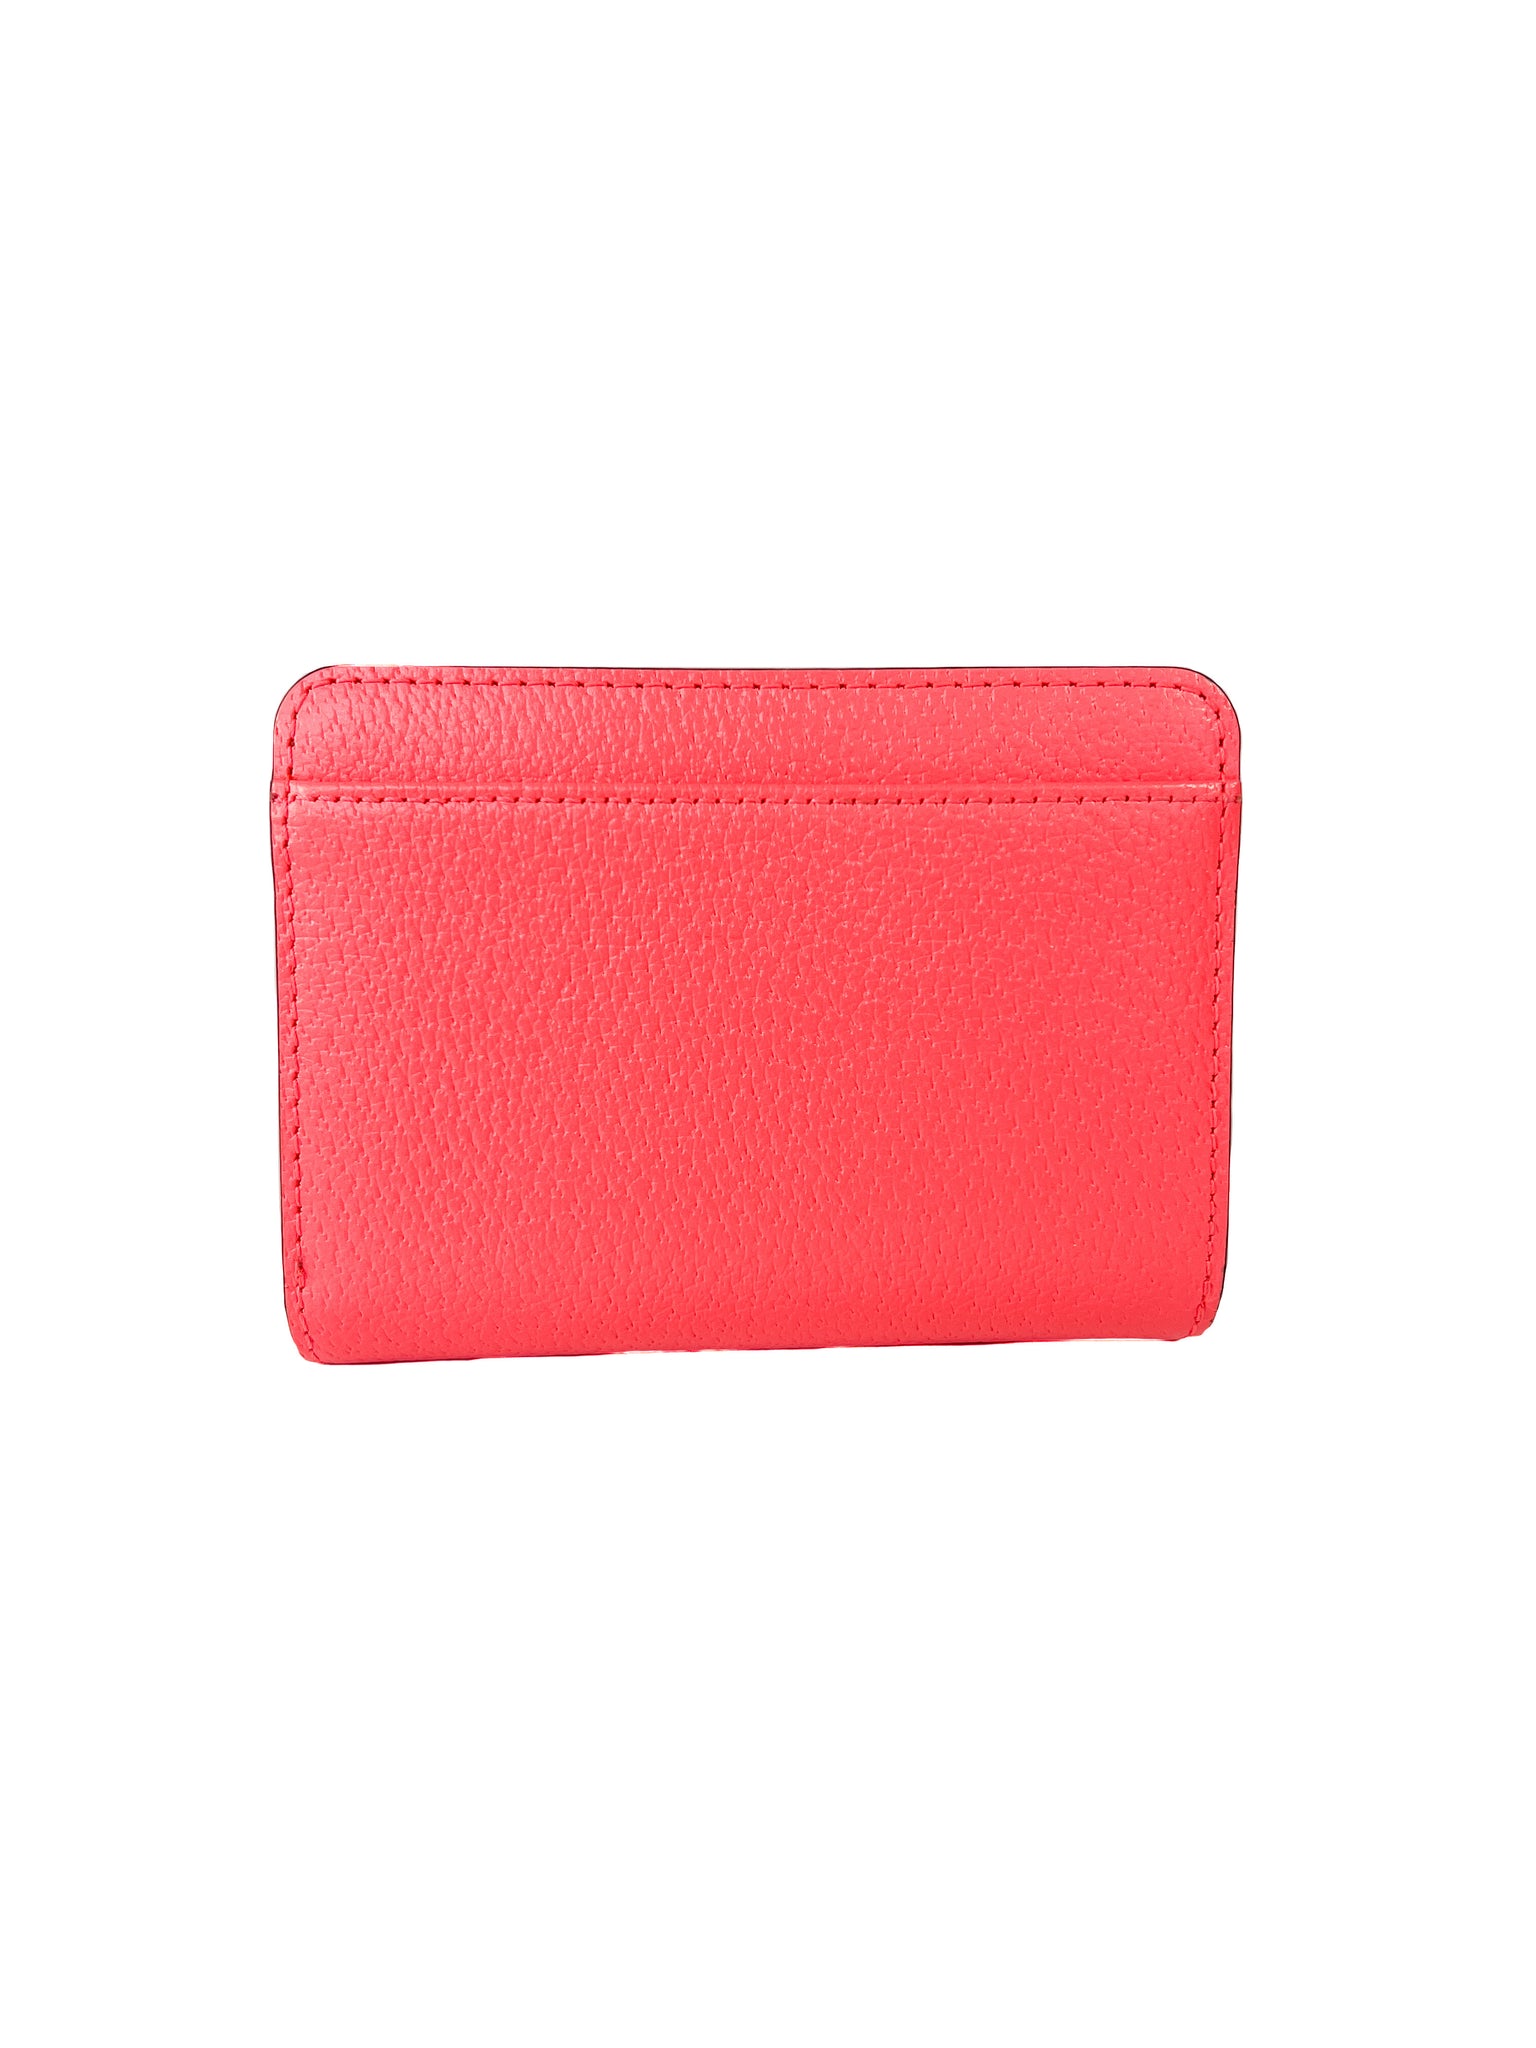 Kate Spade neon pink leather small wallet – My Girlfriend's